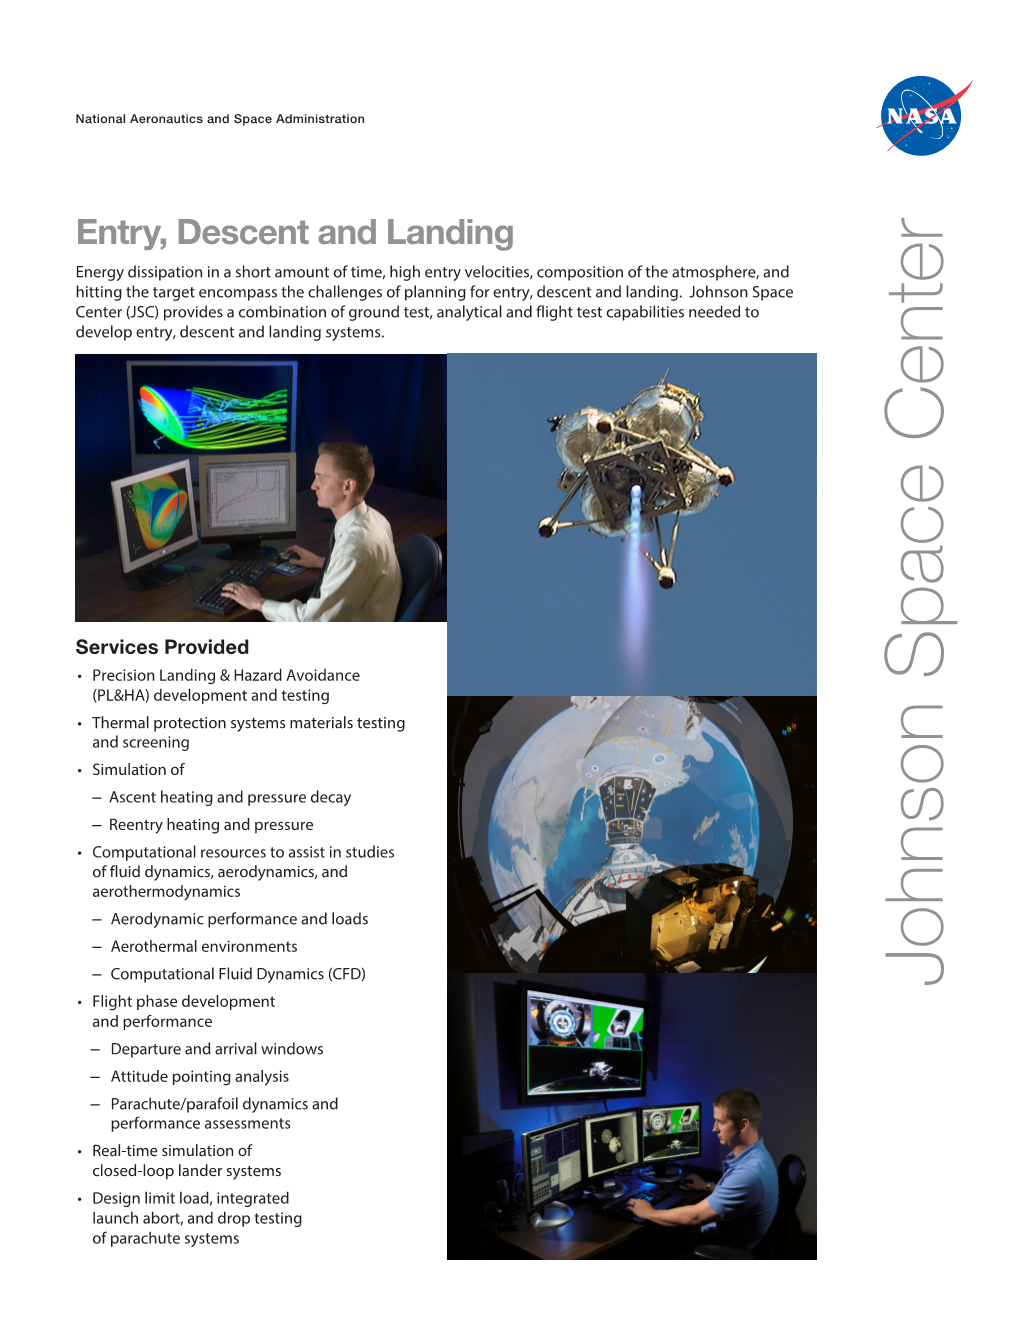 Johnson Space Center (JSC) Provides a Combination of Ground Test, Analytical and Flight Test Capabilities Needed to Develop Entry, Descent and Landing Systems